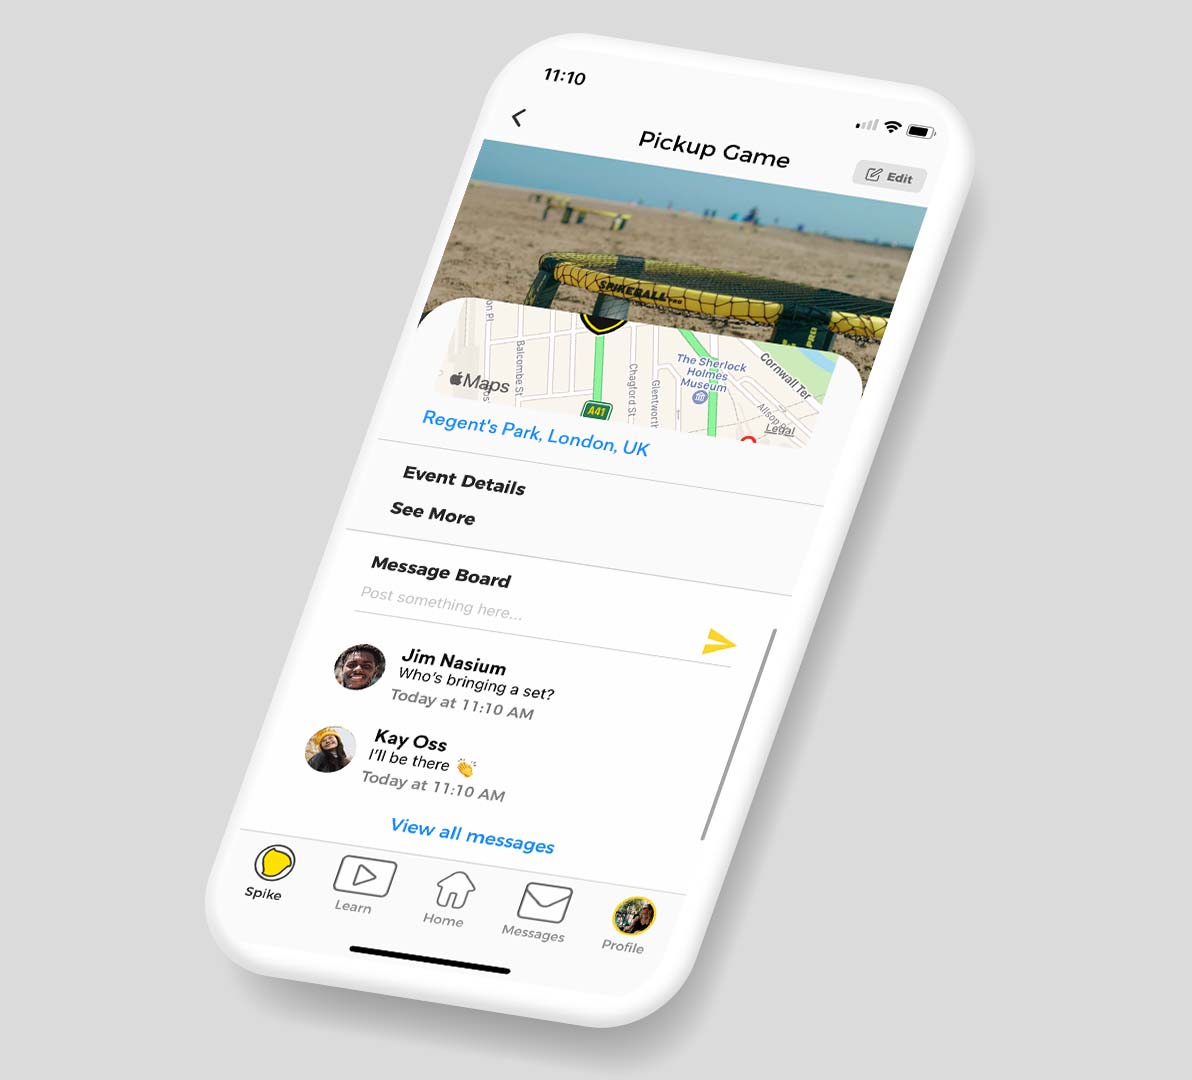 Spikeball app viewed from a mobile